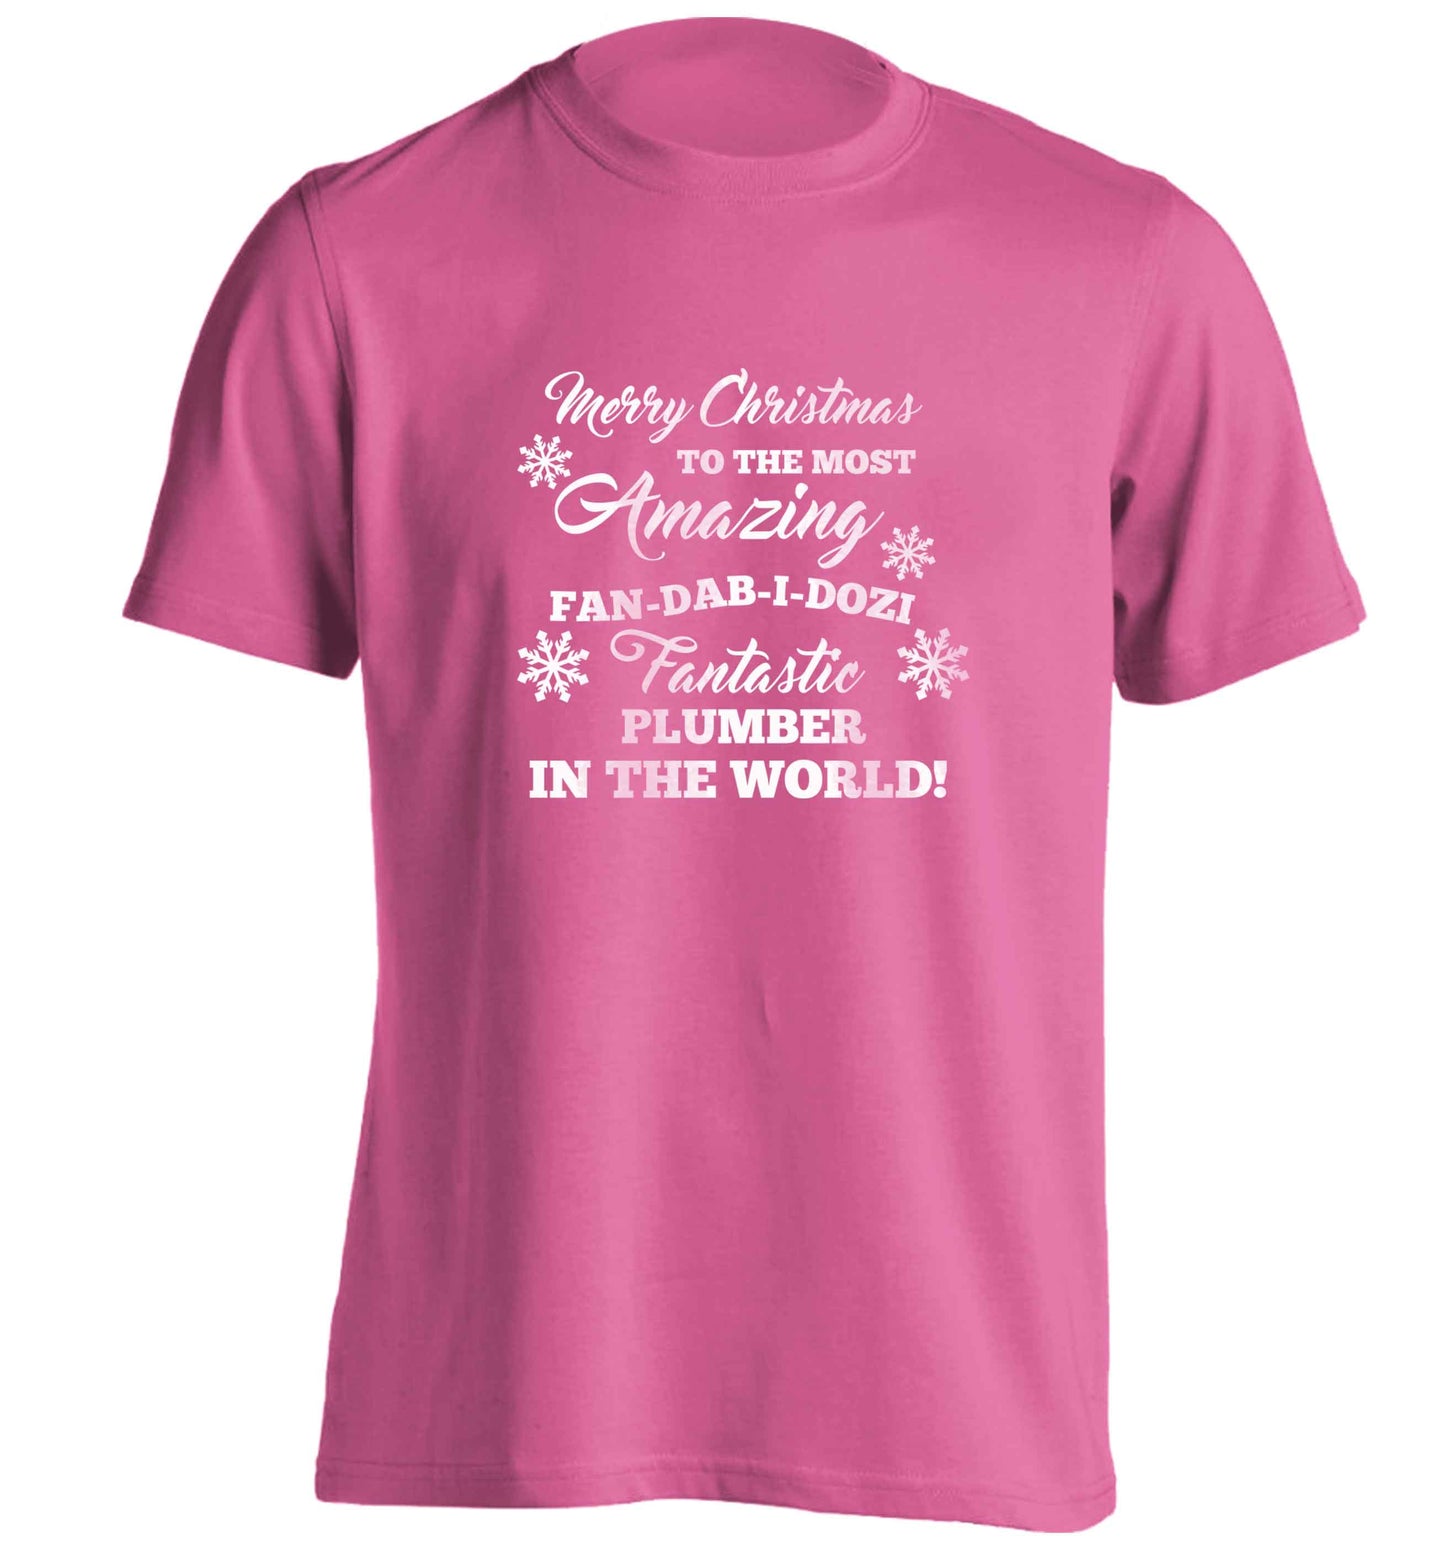 Merry Christmas to the most amazing plumber in the world! adults unisex pink Tshirt 2XL